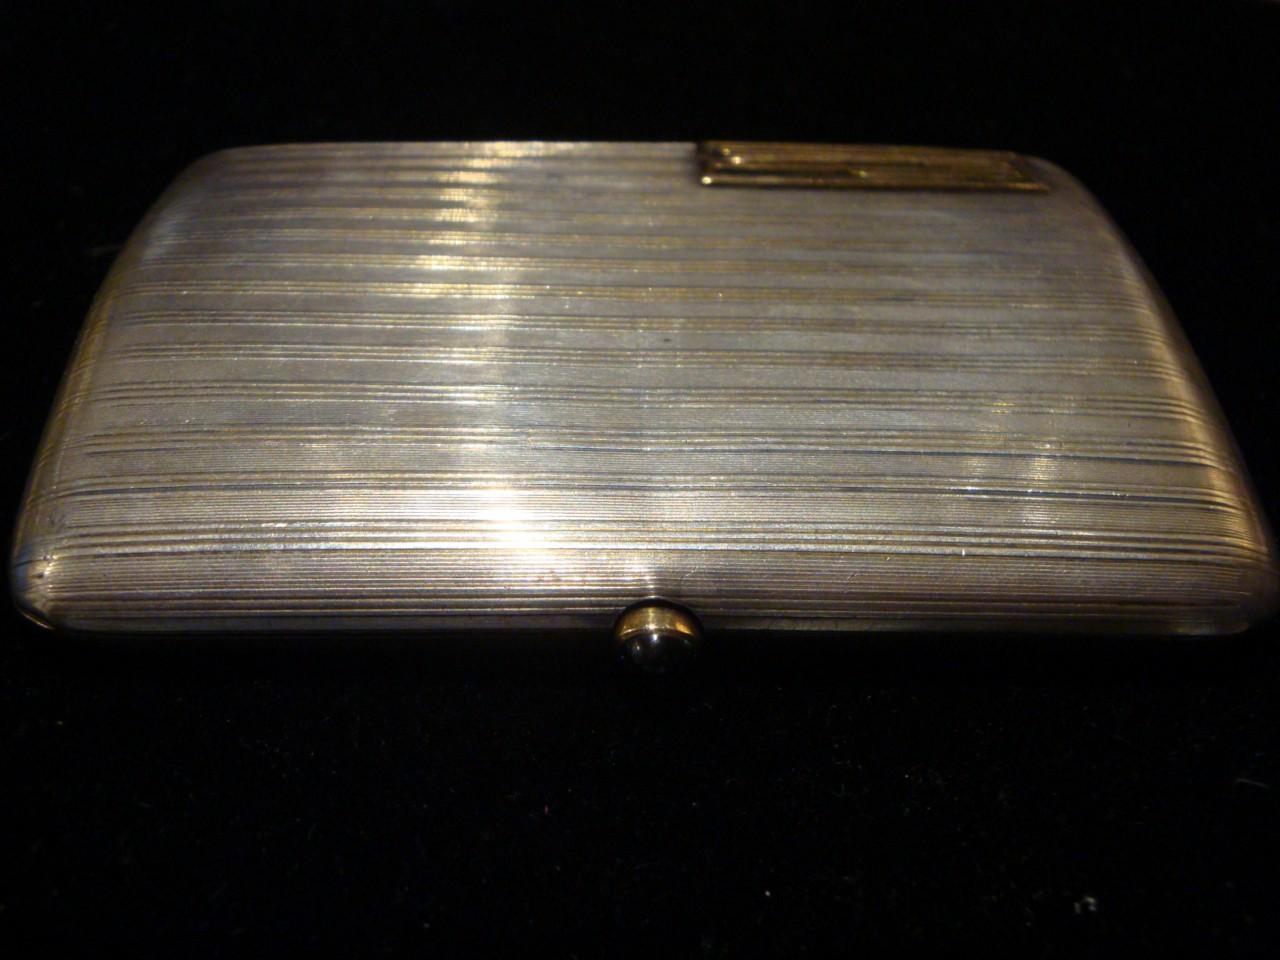 The Following Item we are offering is a Rare Magnificent European Sterling Silver Antique Cigarette Case Possibly English or Russian. Beautifully adorned with a Sapphire Jeweled Cabochon. Monogrammed on the Front. Taken out of an Important Park